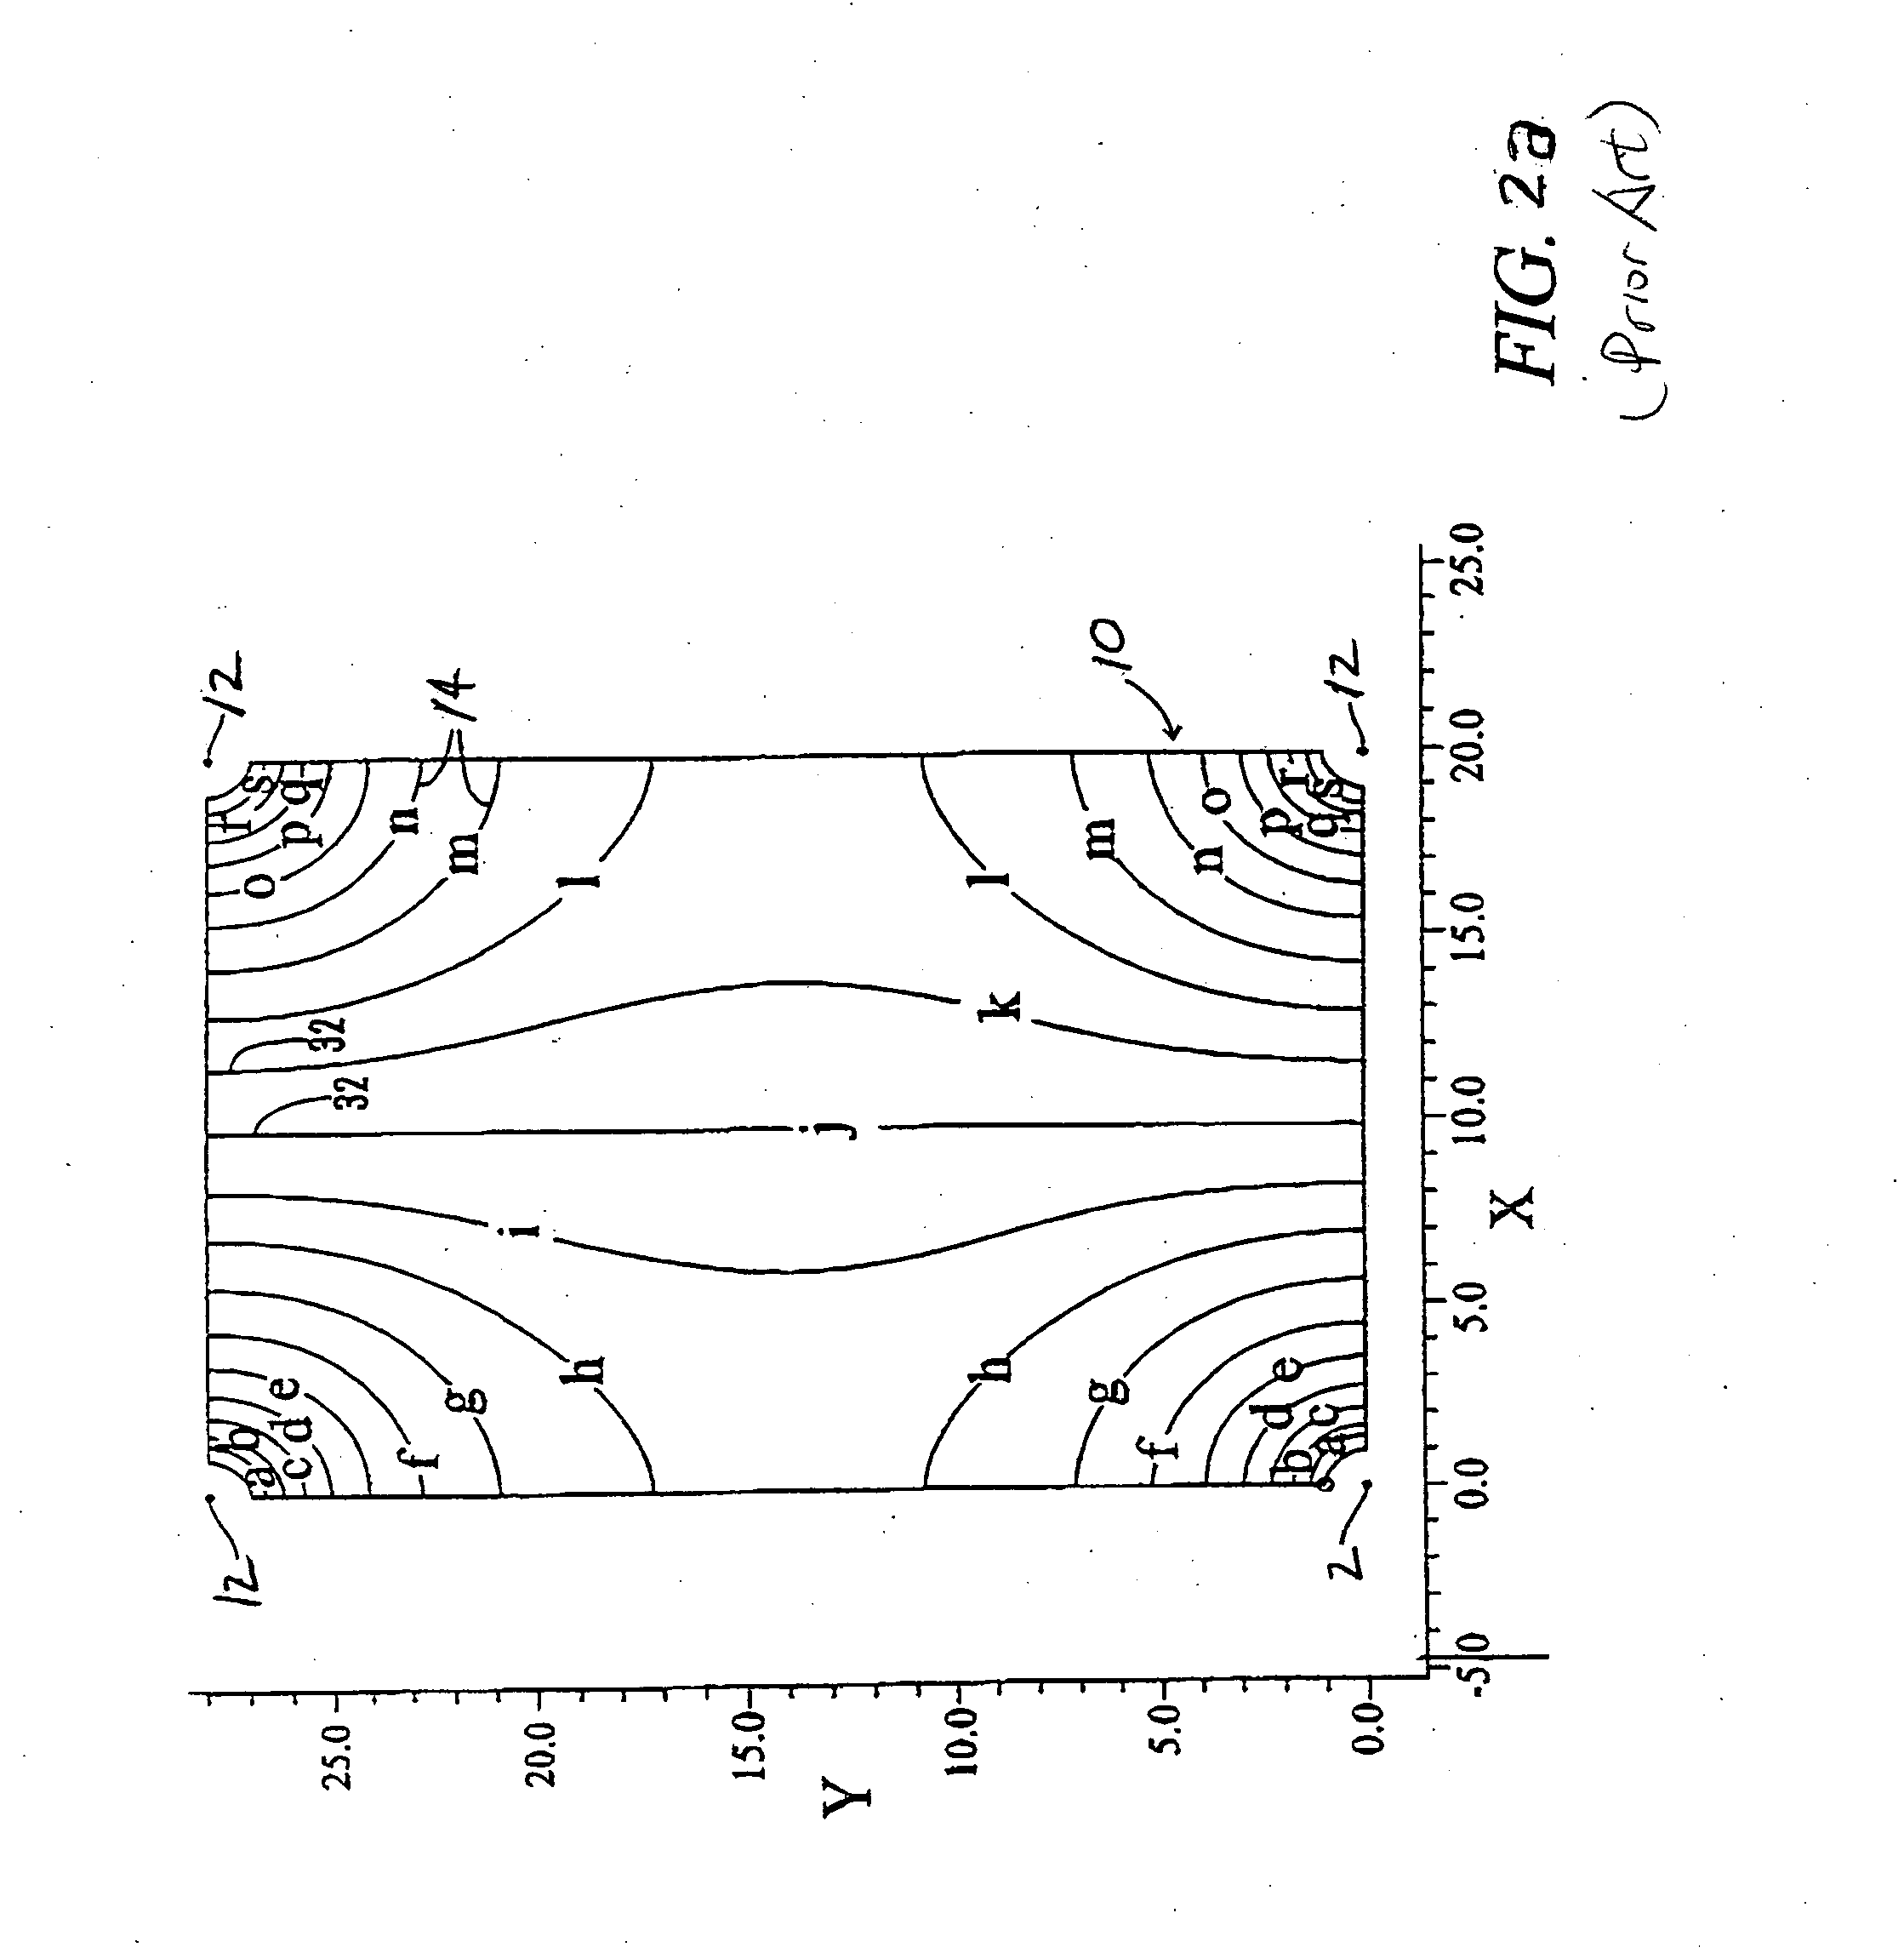 Touch sensor with non-uniform resistive band